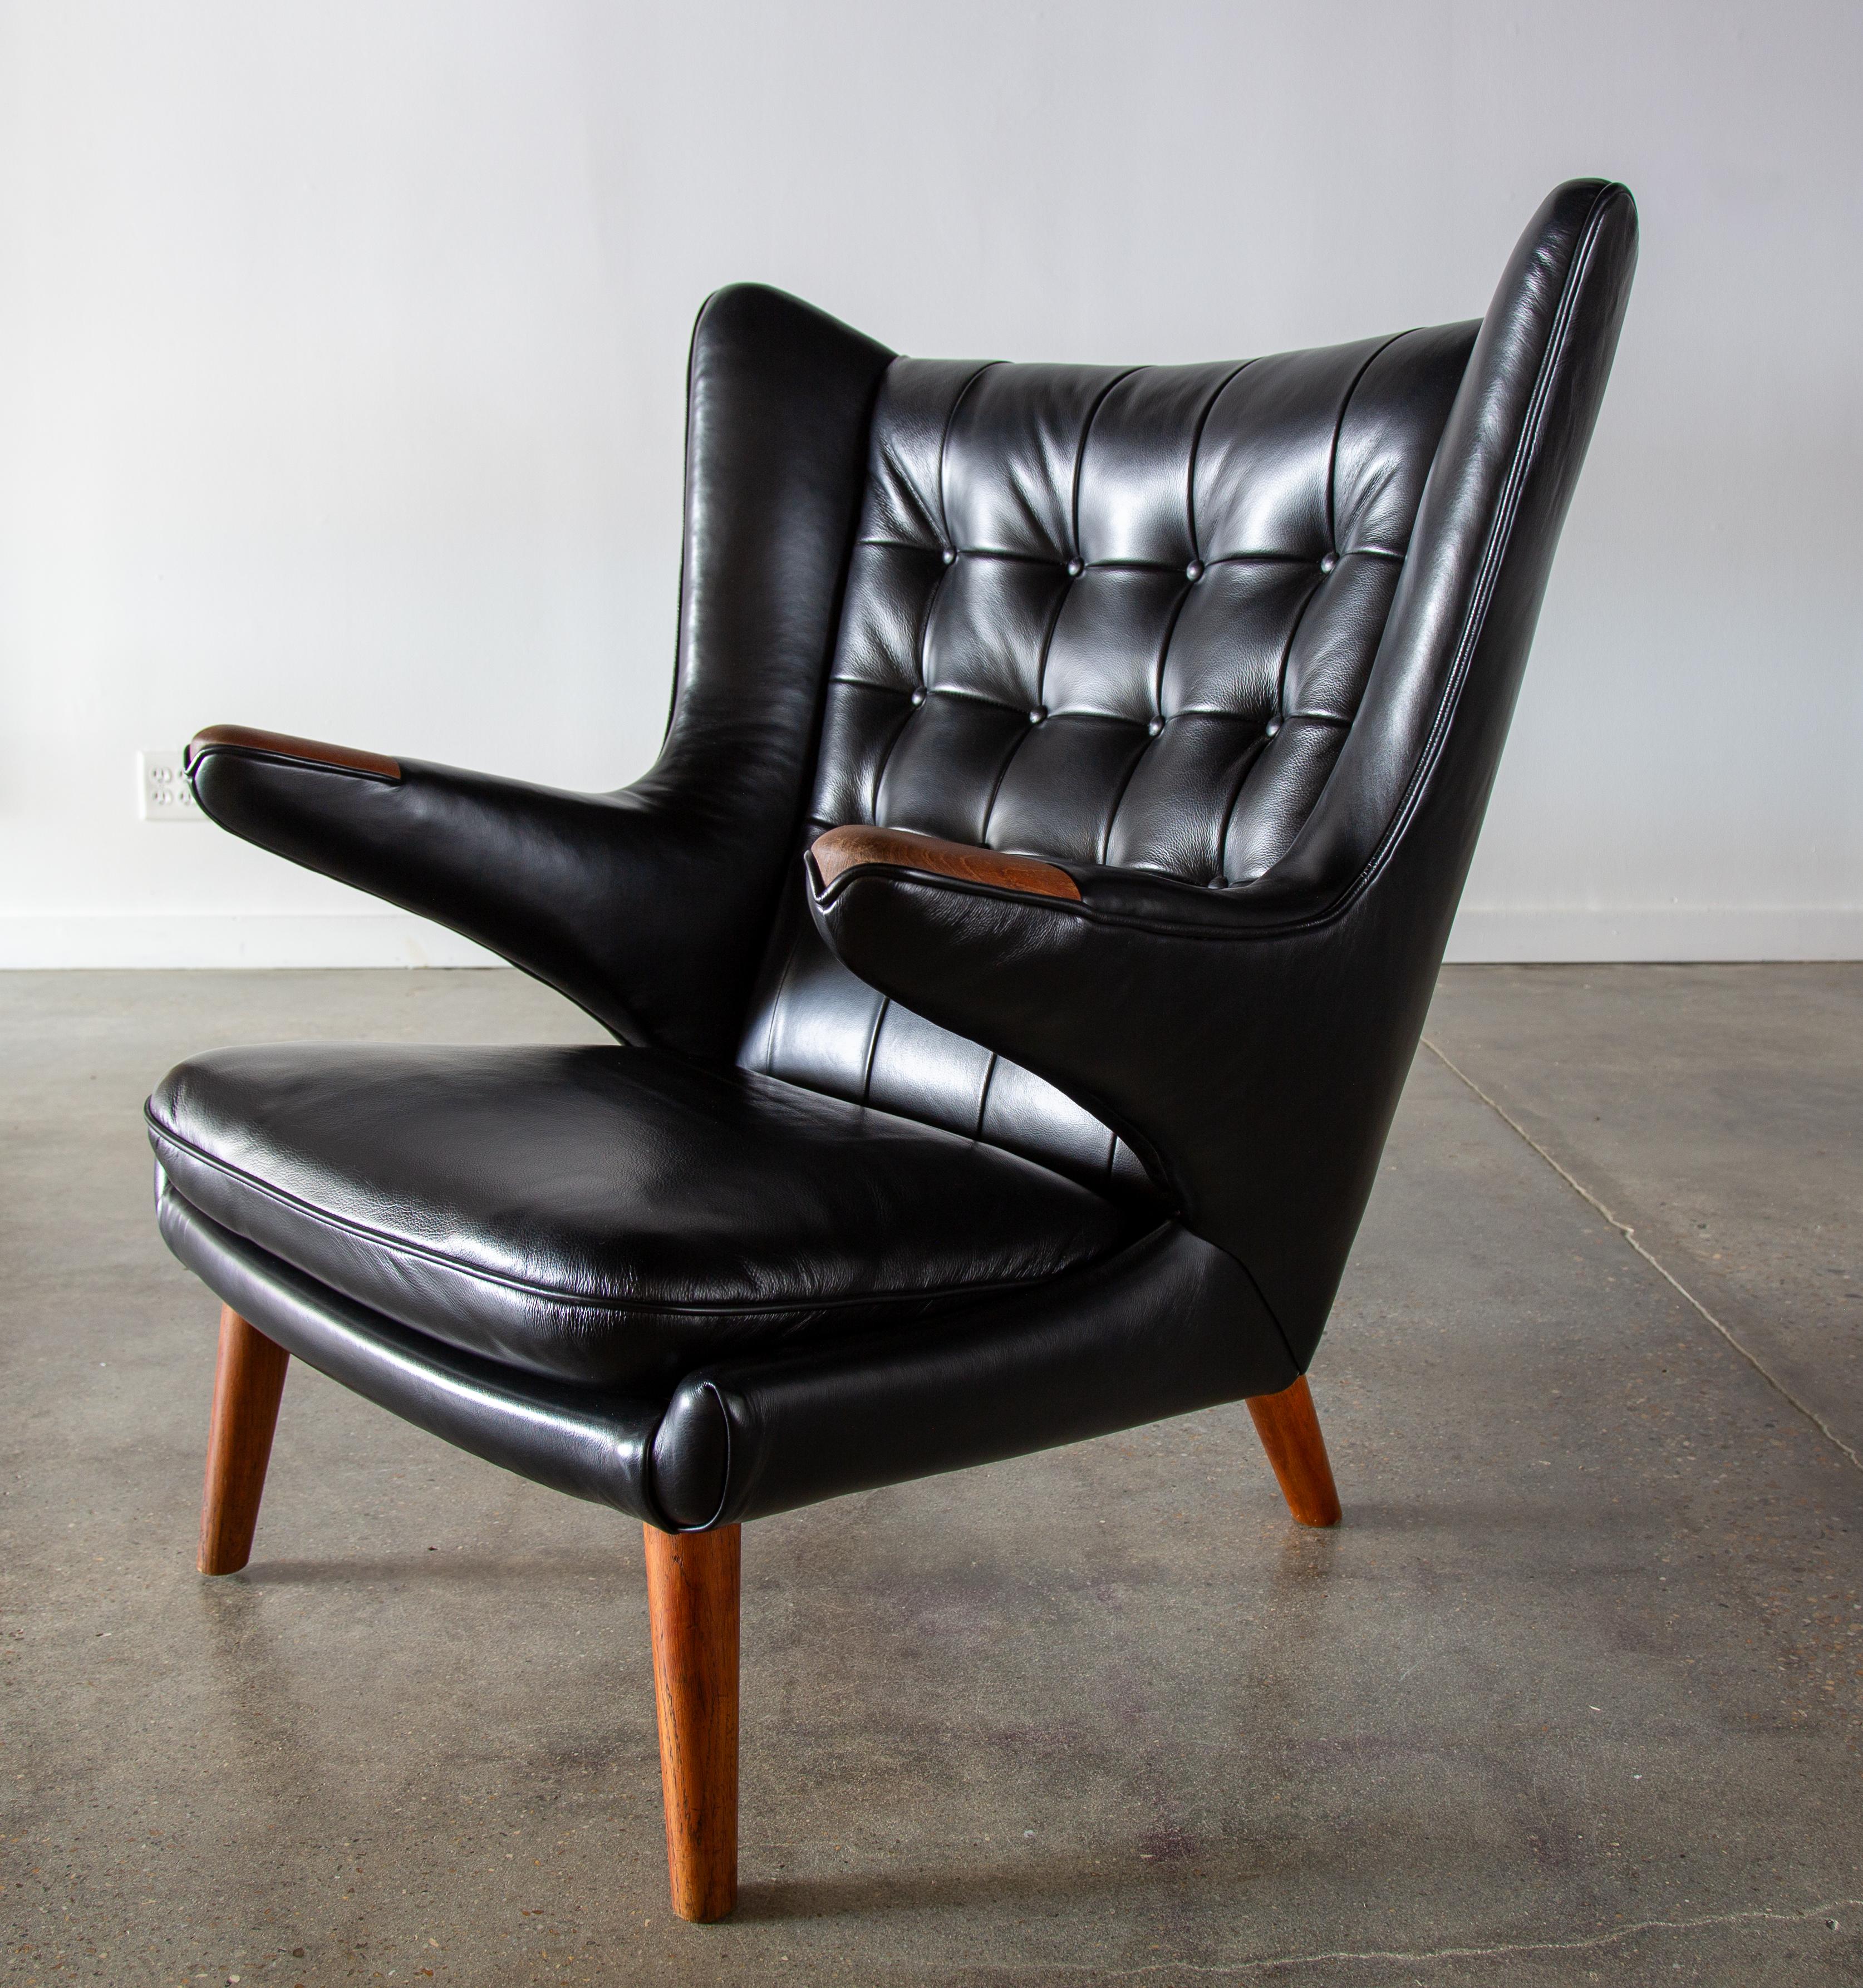 An original AP19 “Papa bear” chair designed by Hans J. Wegner for A.P. Stolen, designed in 1951 and made in Denmark.  This example with new black leather and featuring oak legs and teak paws. Retaining its original made in Denmark medallion. This